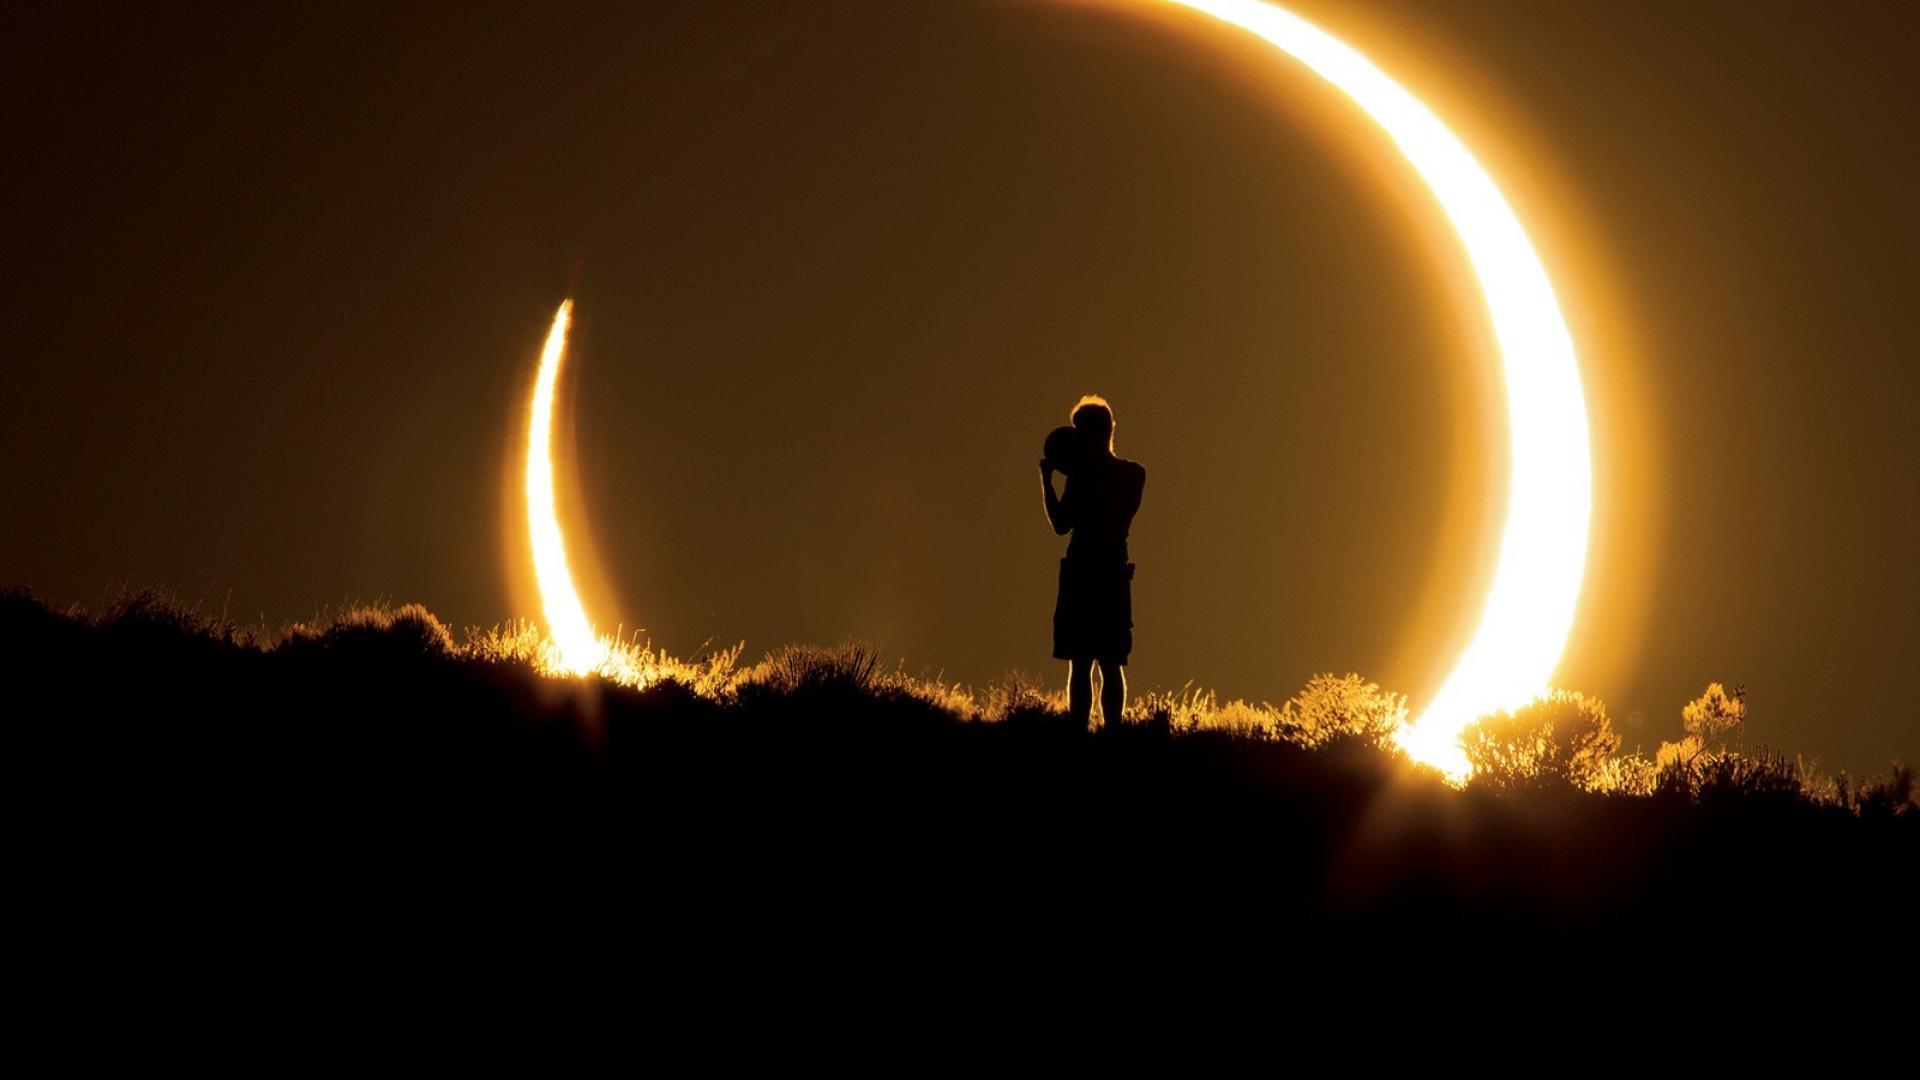 Nature sun moon silhouettes national geographic solar eclipse